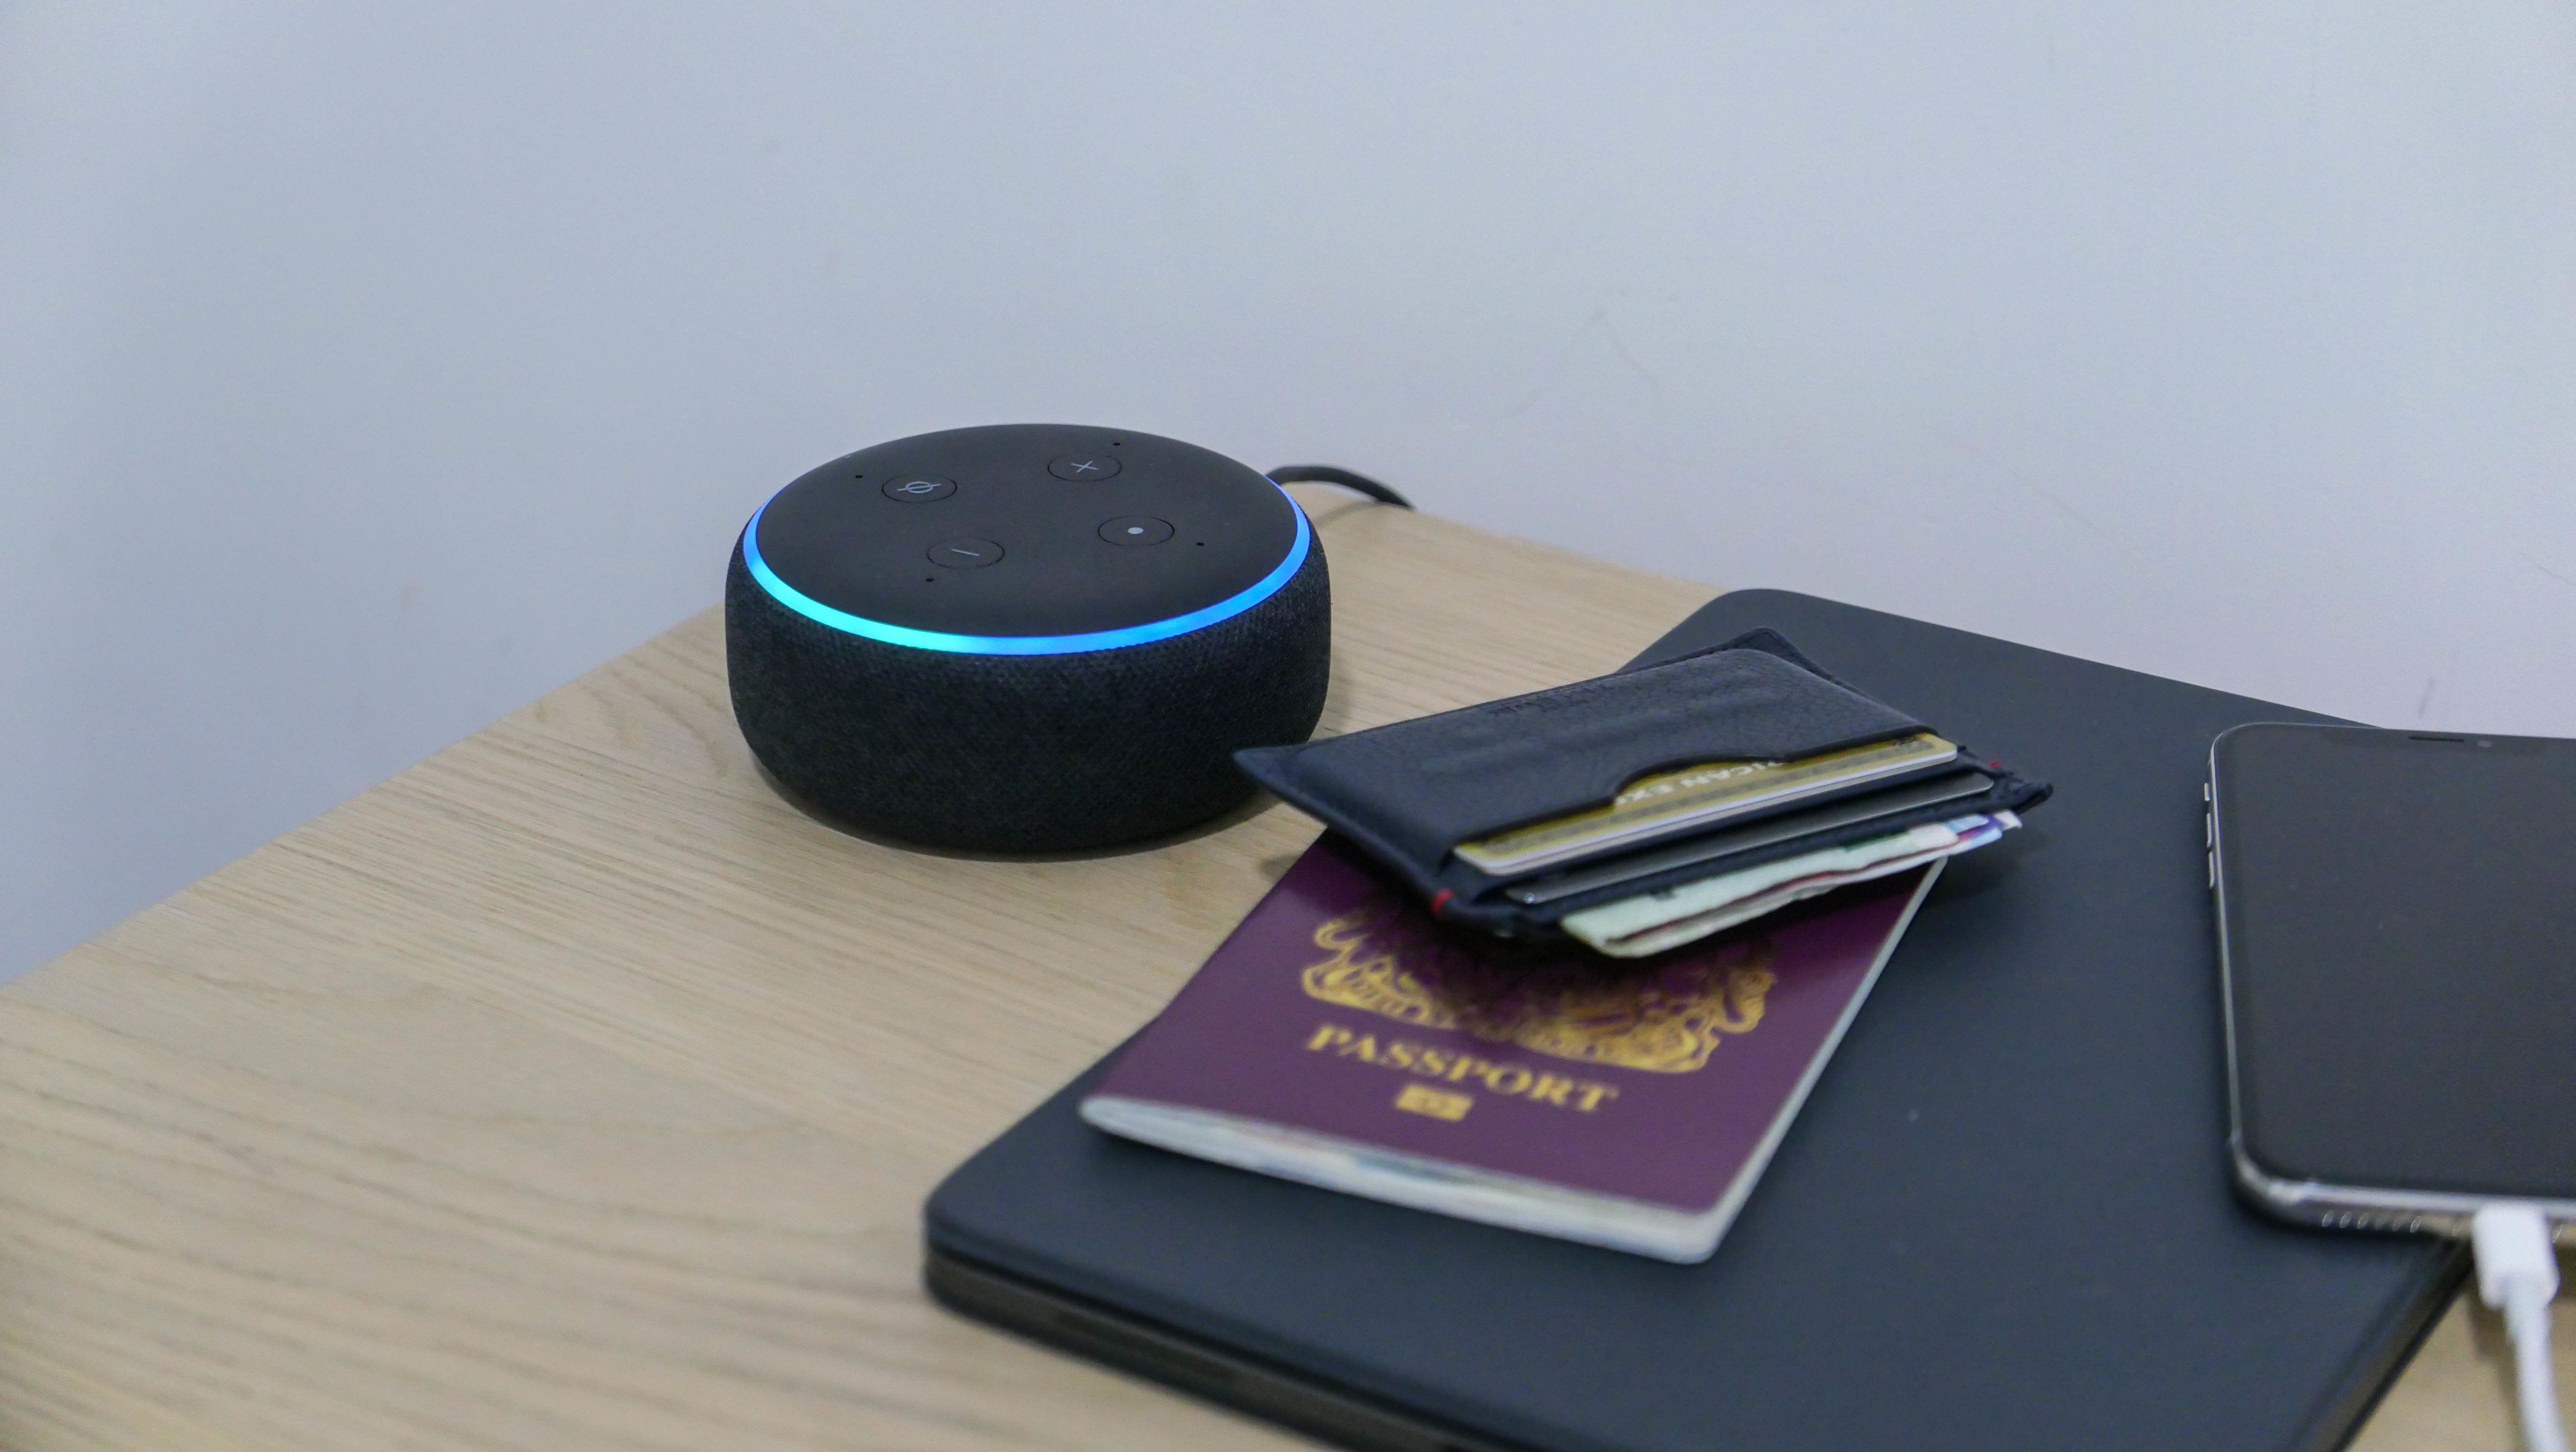 https://www.gearbrain.com/media-library/less-than-p-greater-than-see-how-alexa-can-become-the-perfect-connected-travel-companion-on-your-next-holiday-getaway-less-than-p-greater-than.jpg?id=19264919